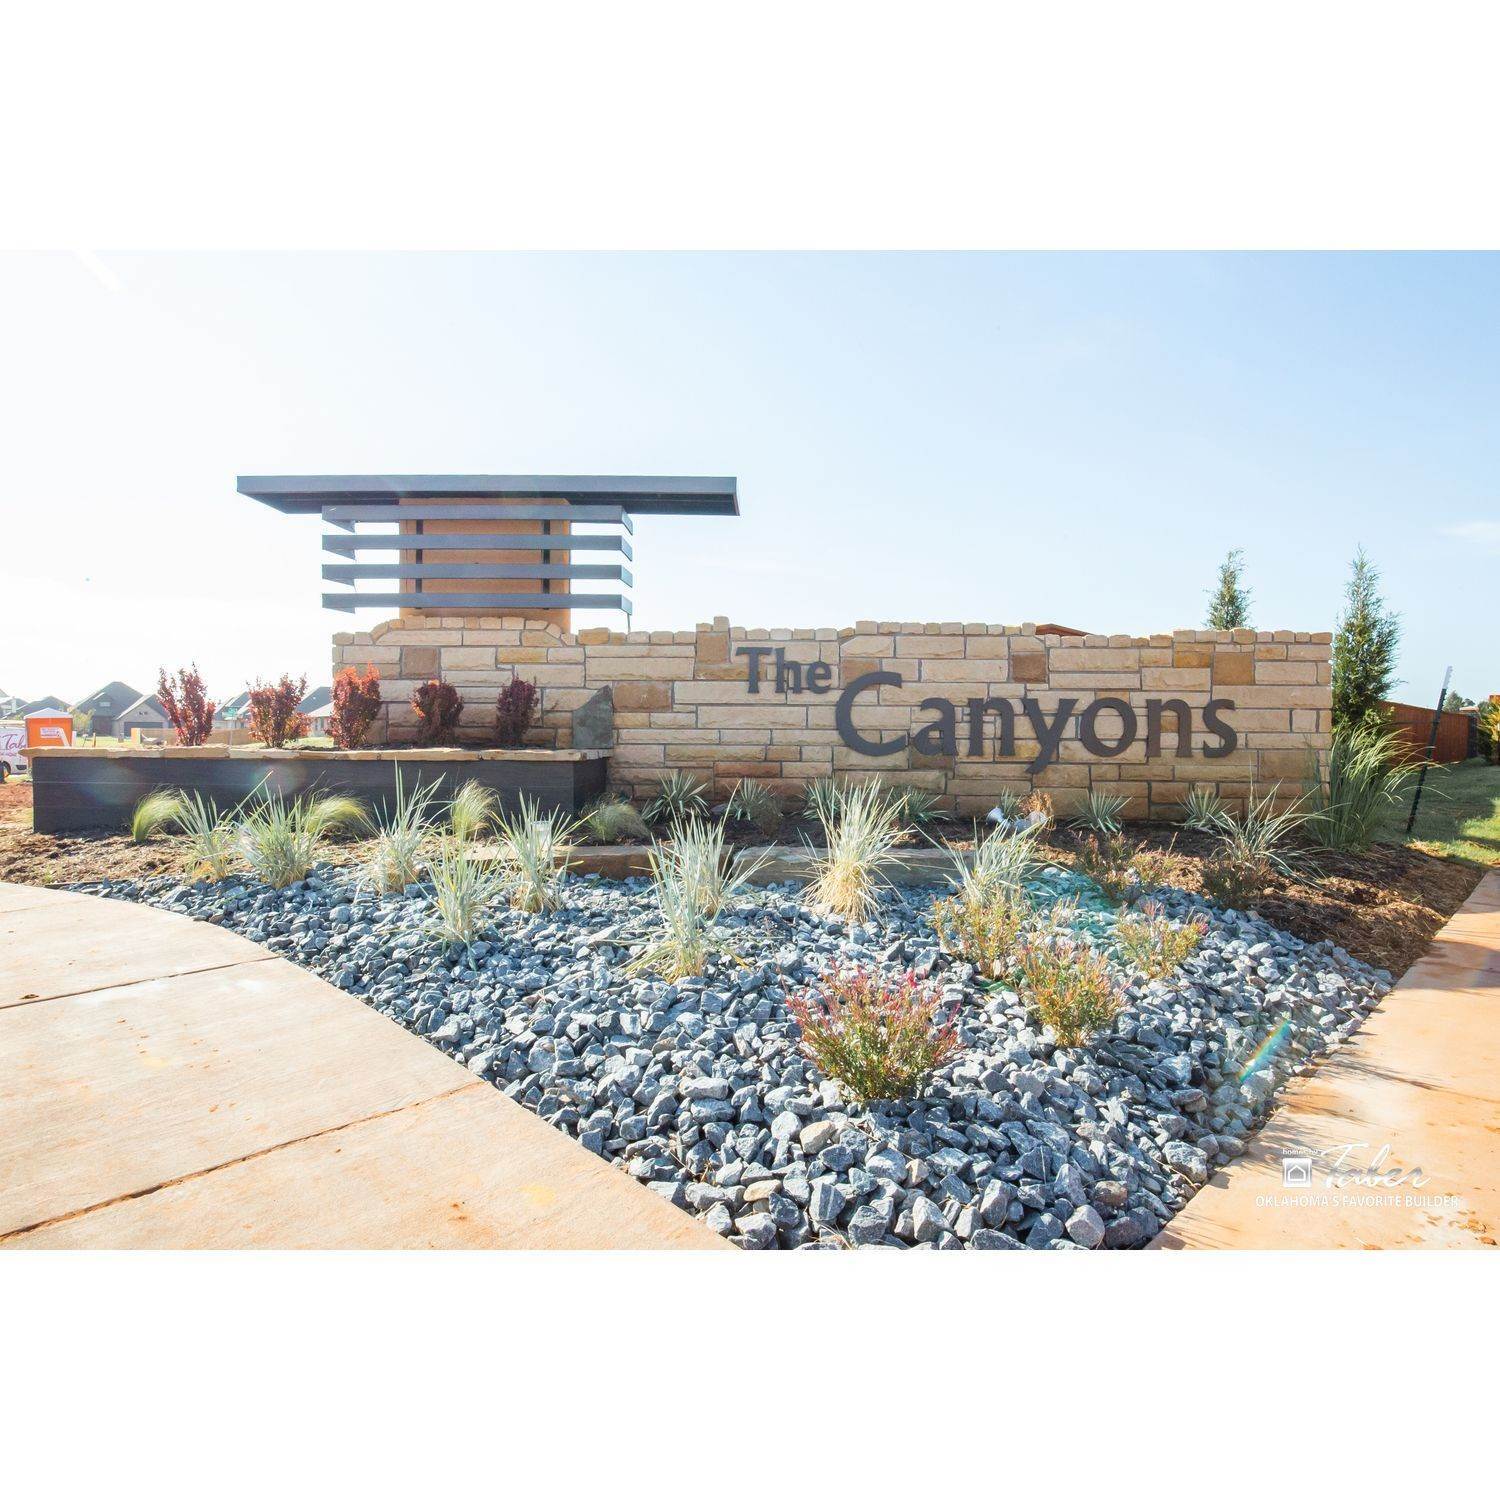 50. Canyons gebouw op 10533 SW 52nd St, Mustang, OK 73064